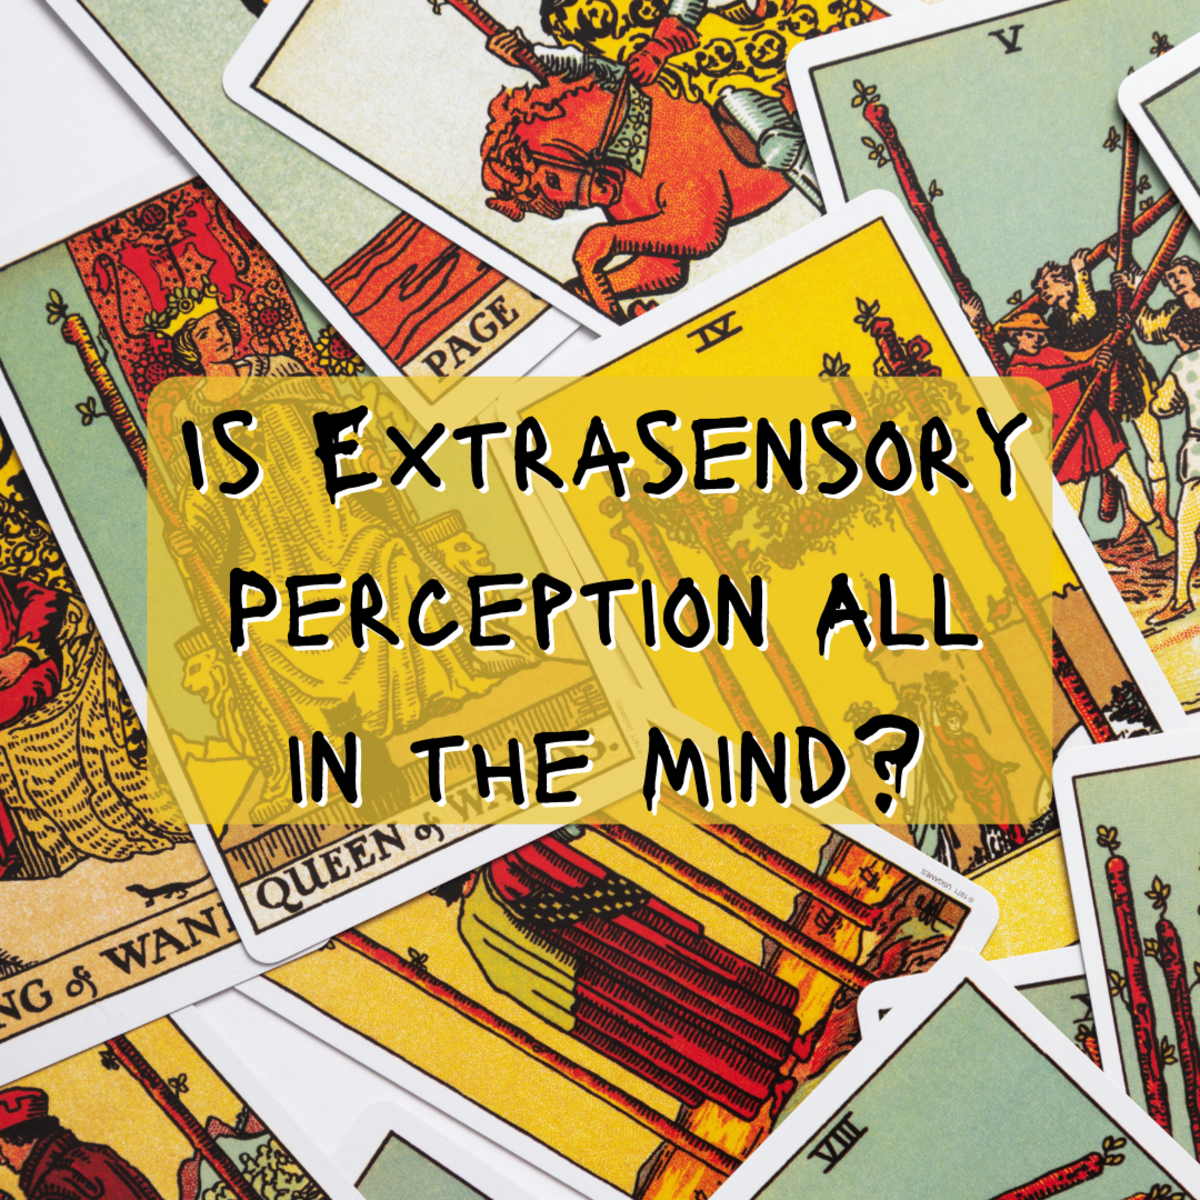 Read on to learn about extrasensory perception and some intriguing attempts to study it and prove its existence.